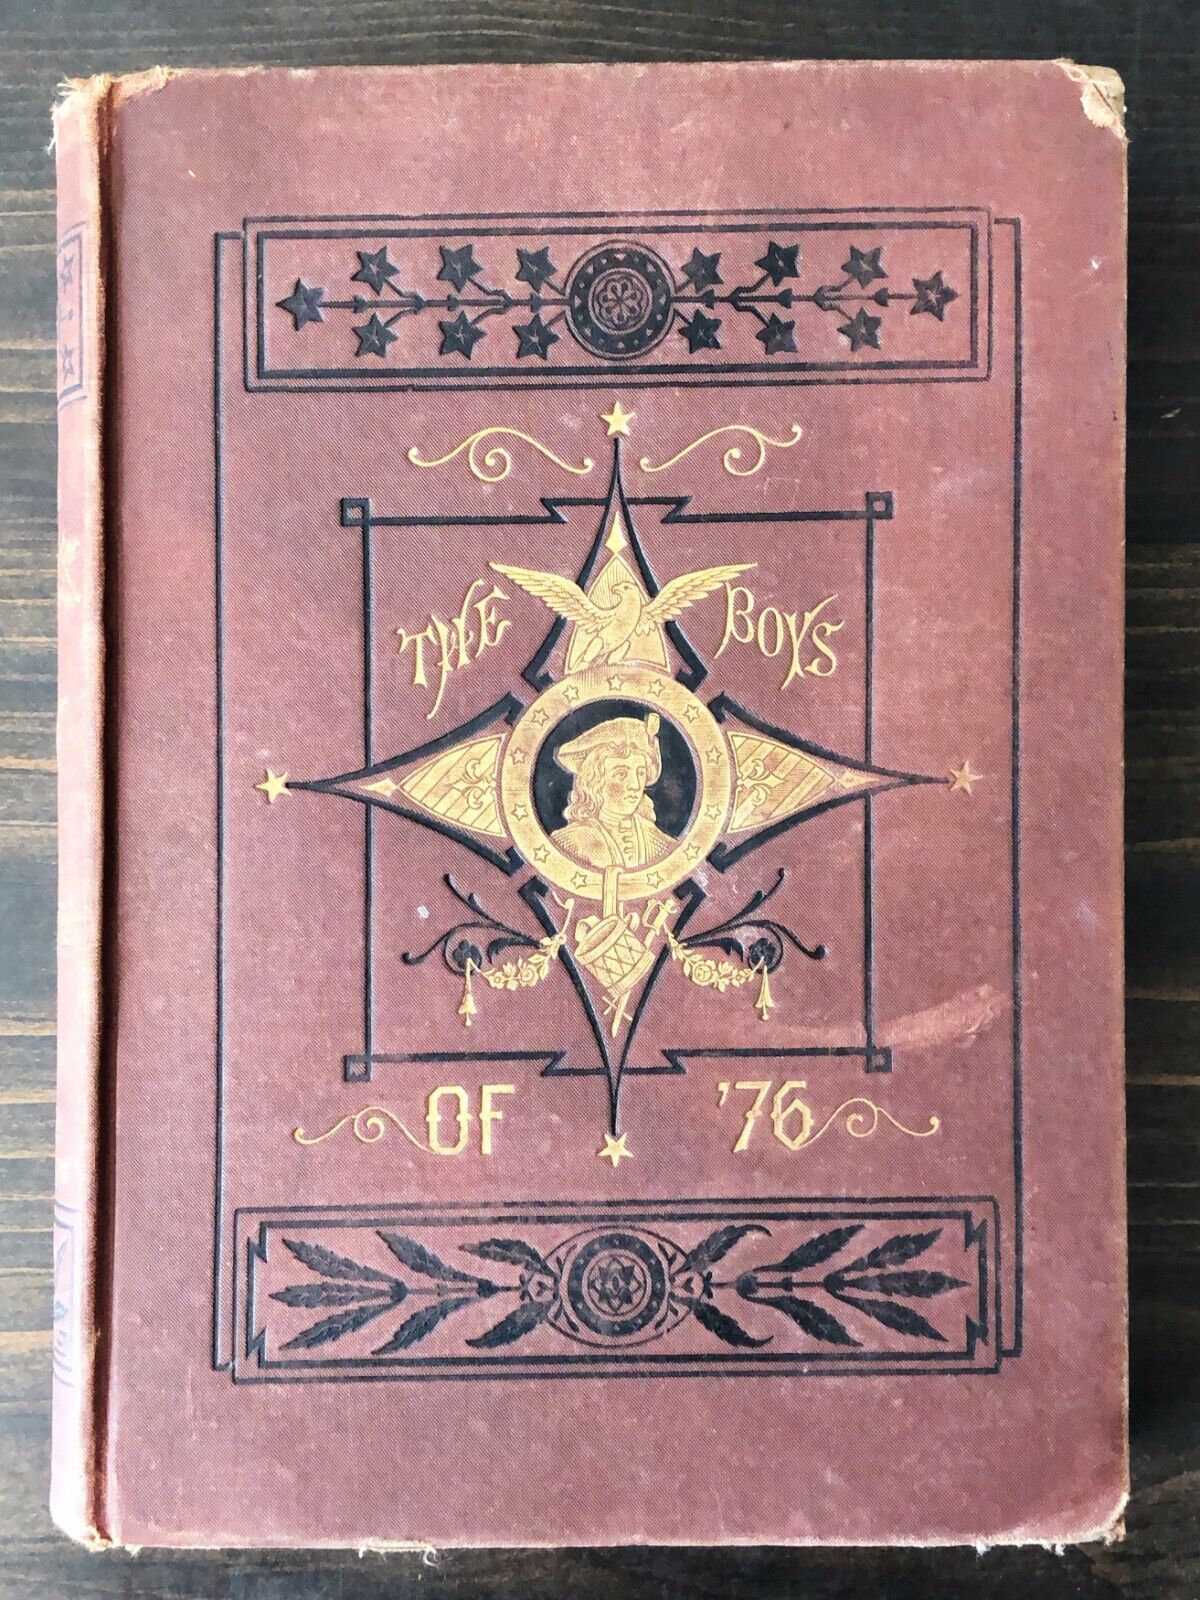 1876, The Boys Of \'76 : History Of Battles Of The Revolution by Charles Coffin